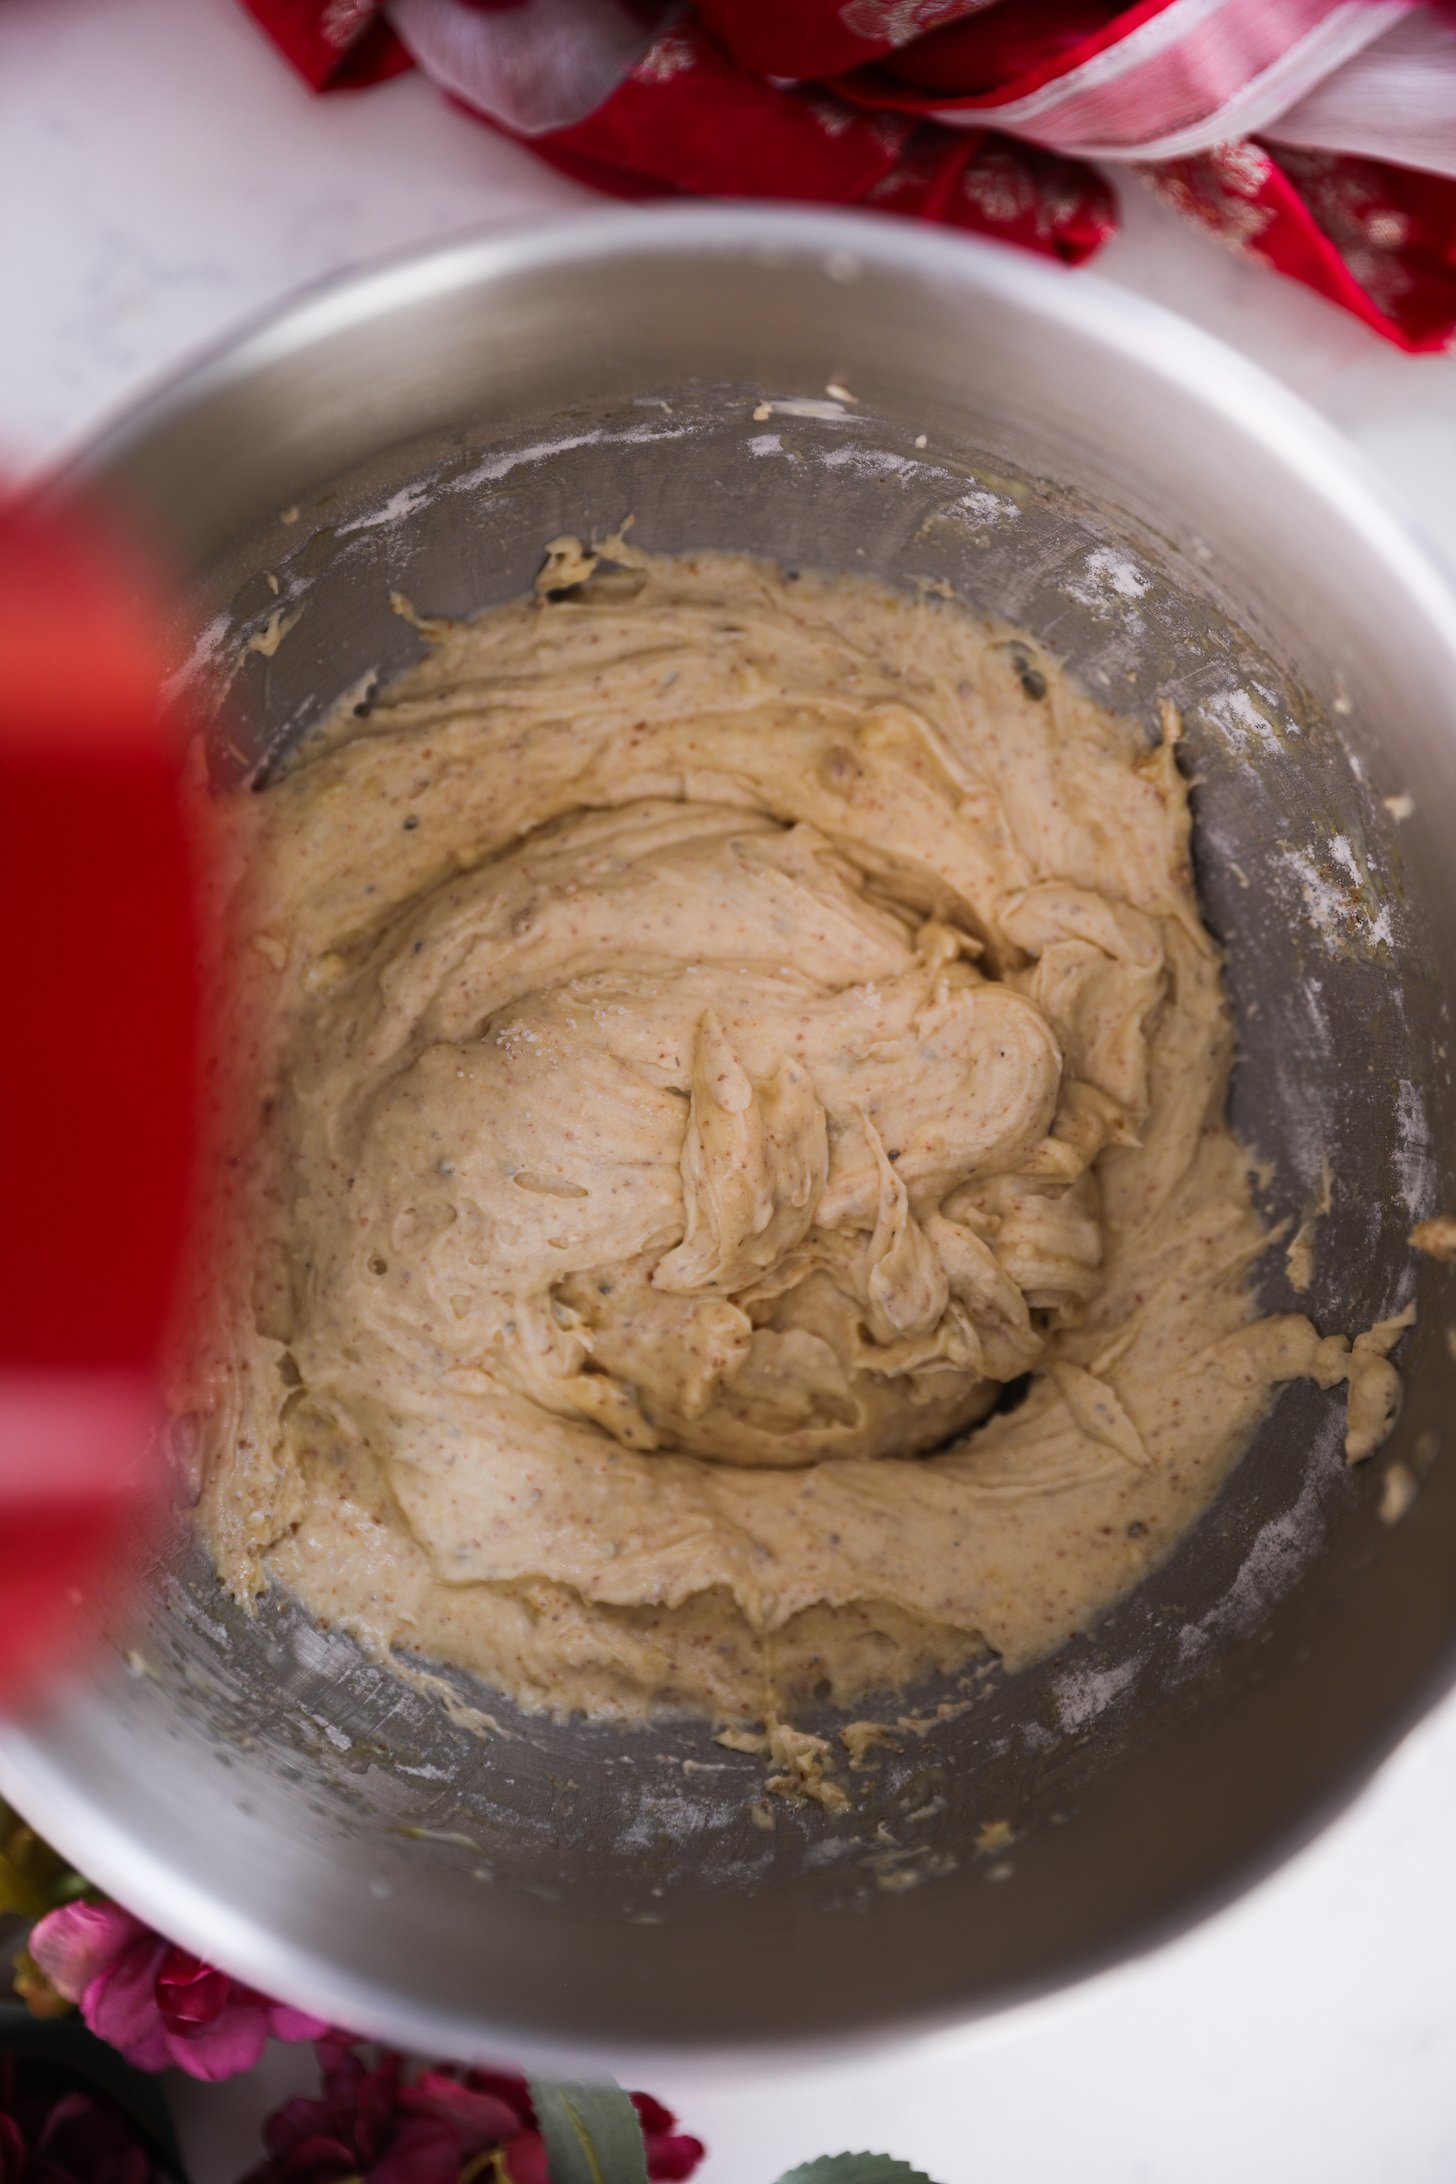 An overhead shot reveals a stand mixer bowl containing a thick cake batter.